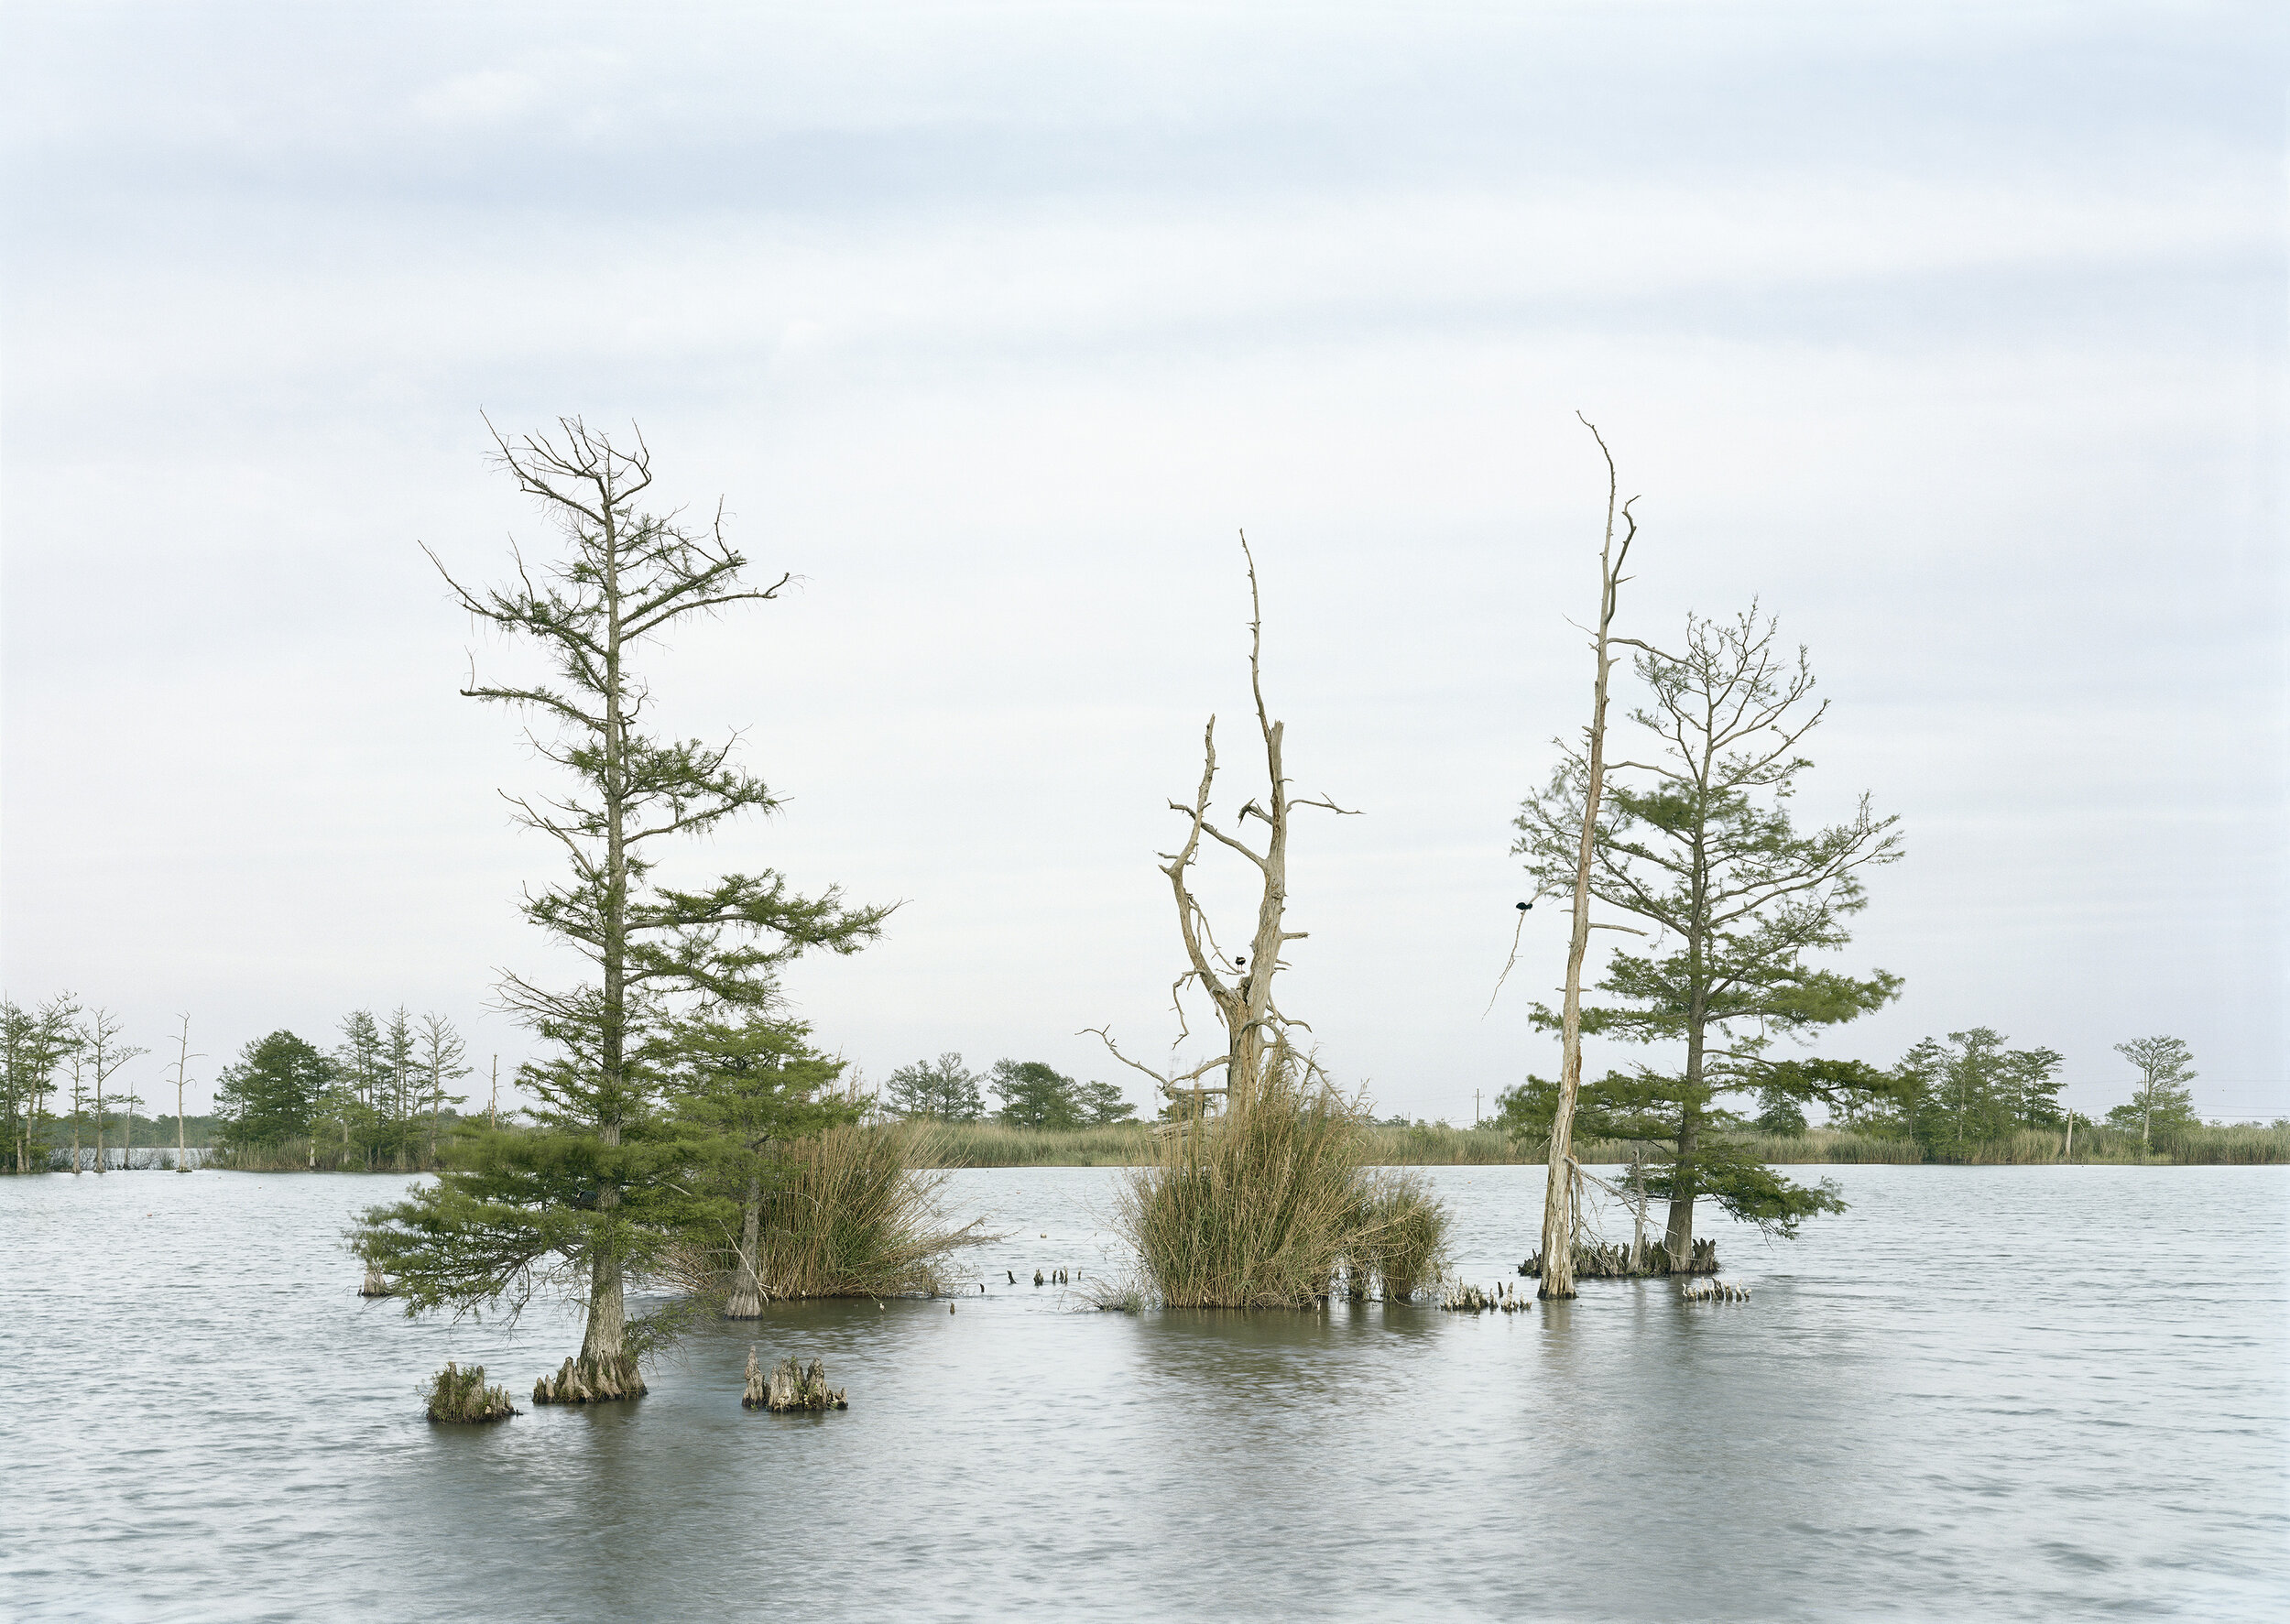 Fragment I: Swamp, April 17, Venice, Louisiana, from Silent General, 2016